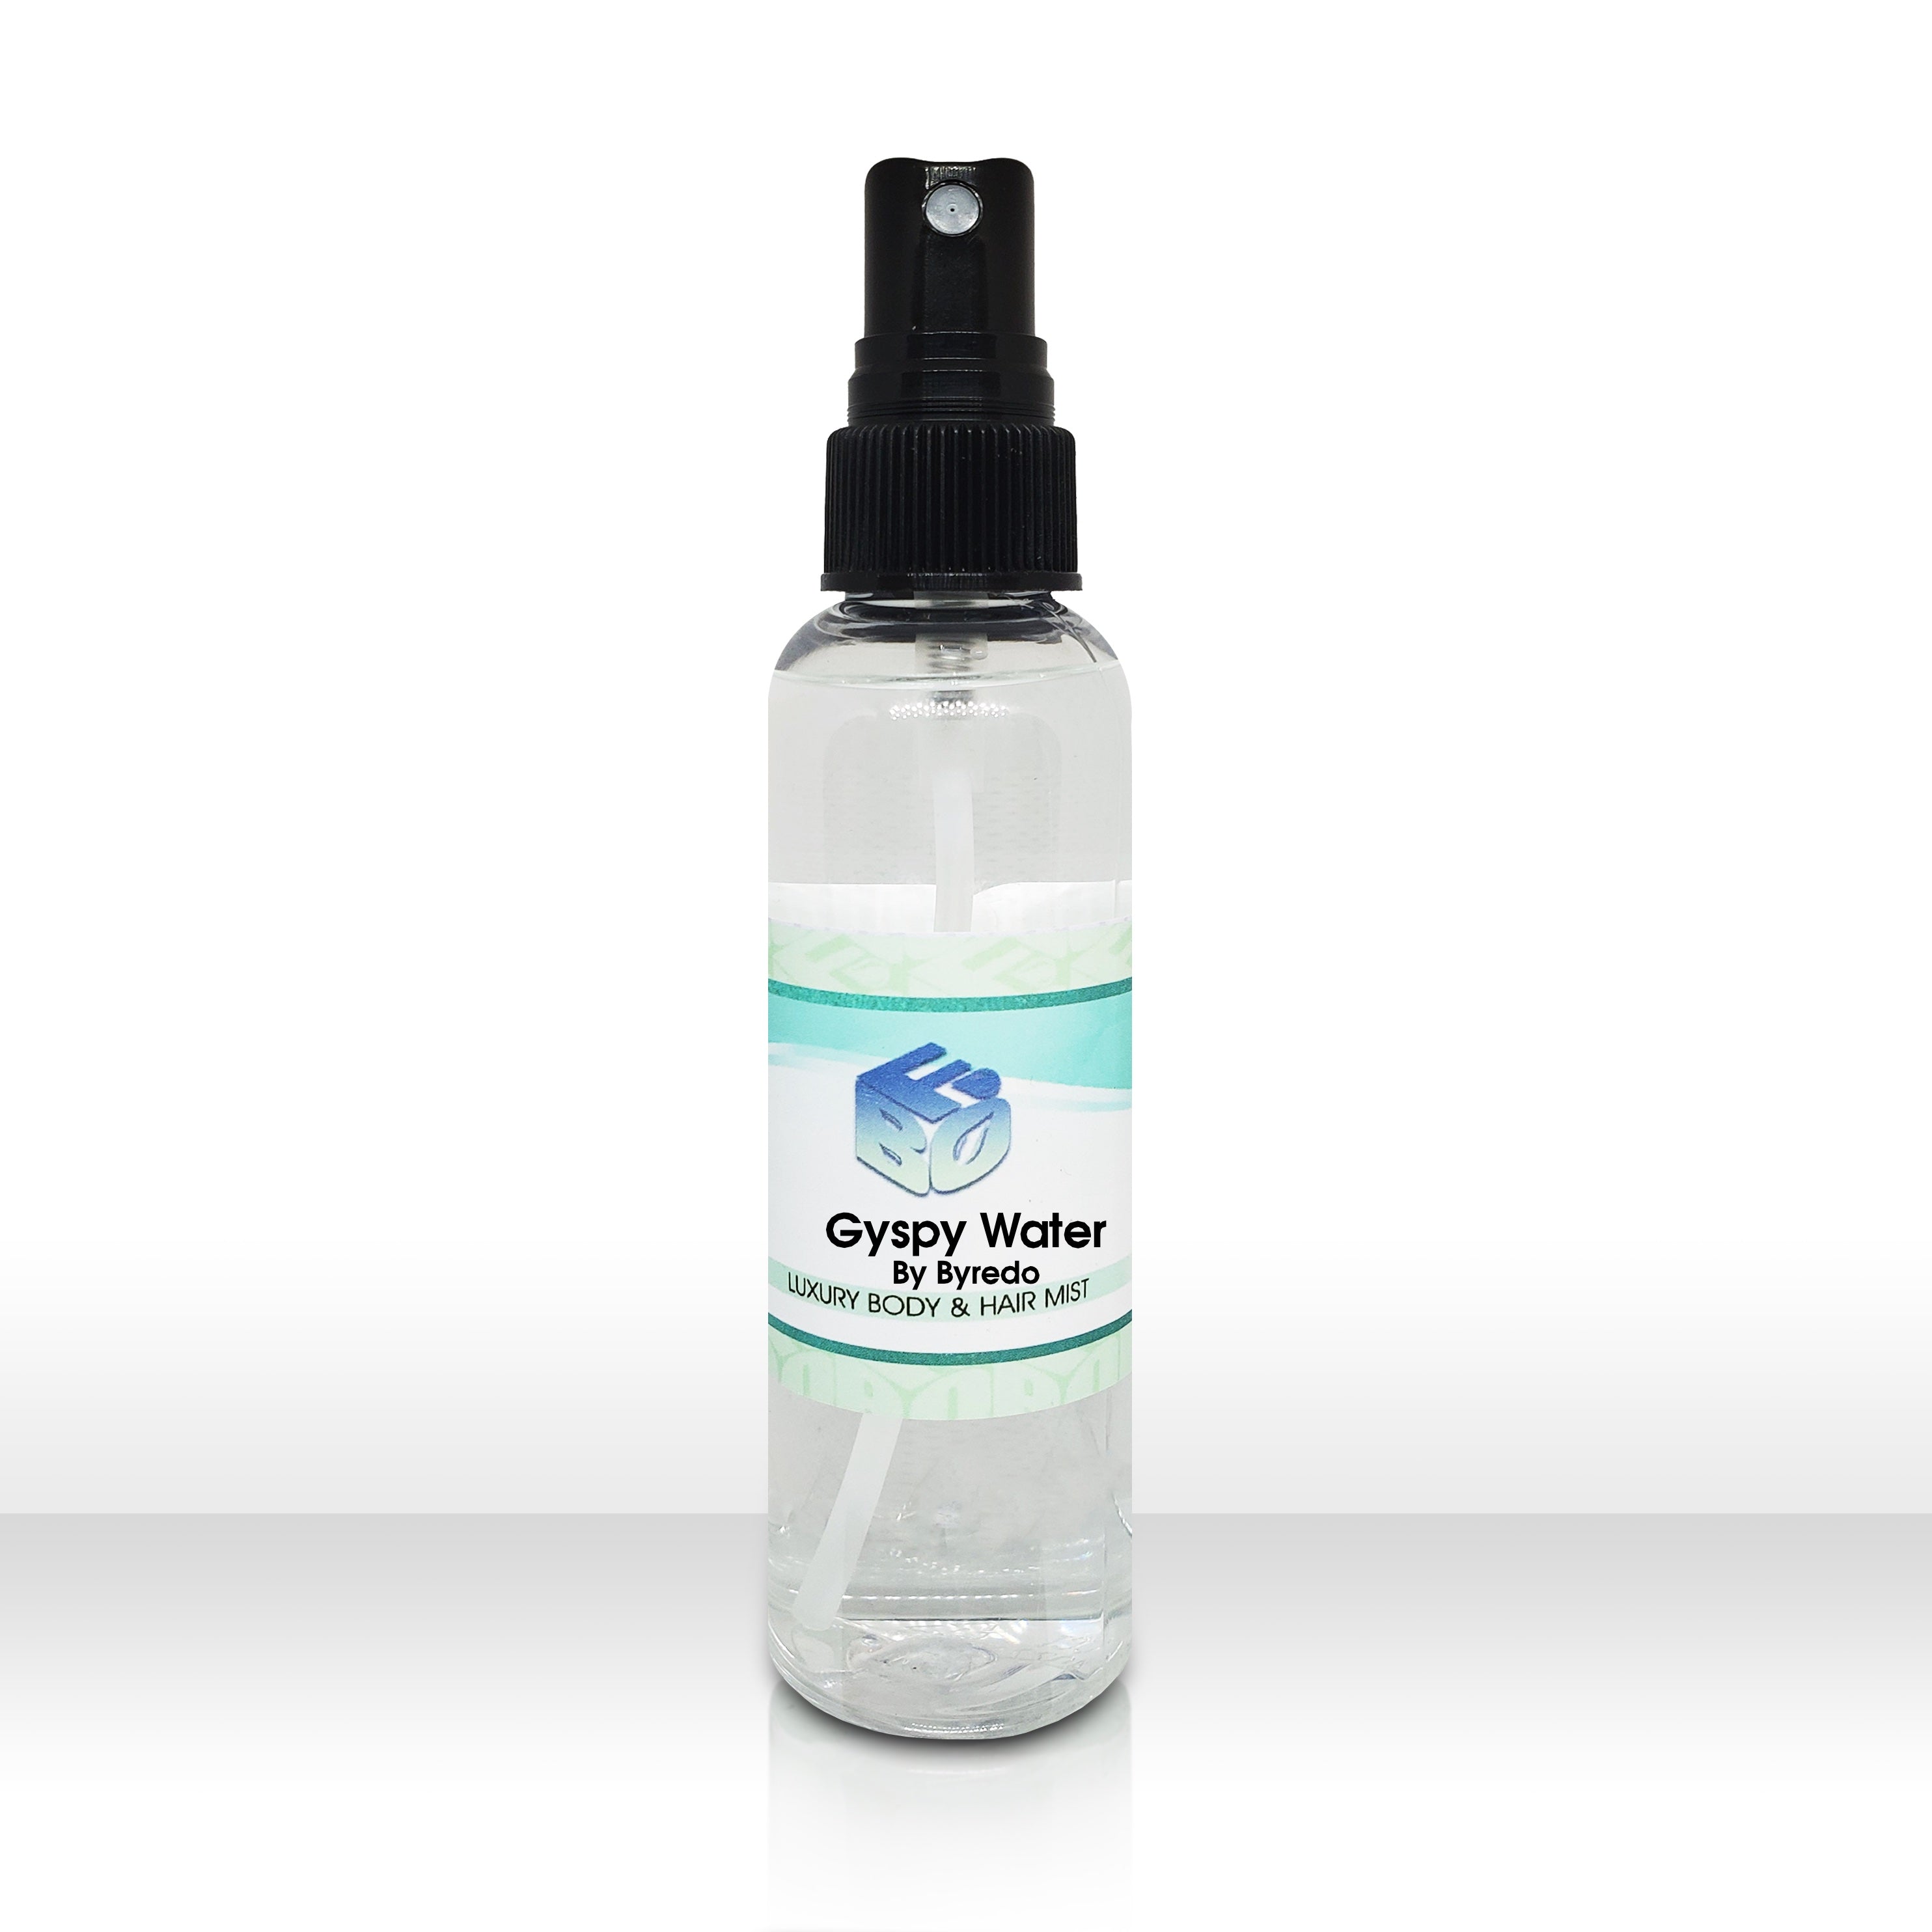 Compare Aroma to Gypsy Water®